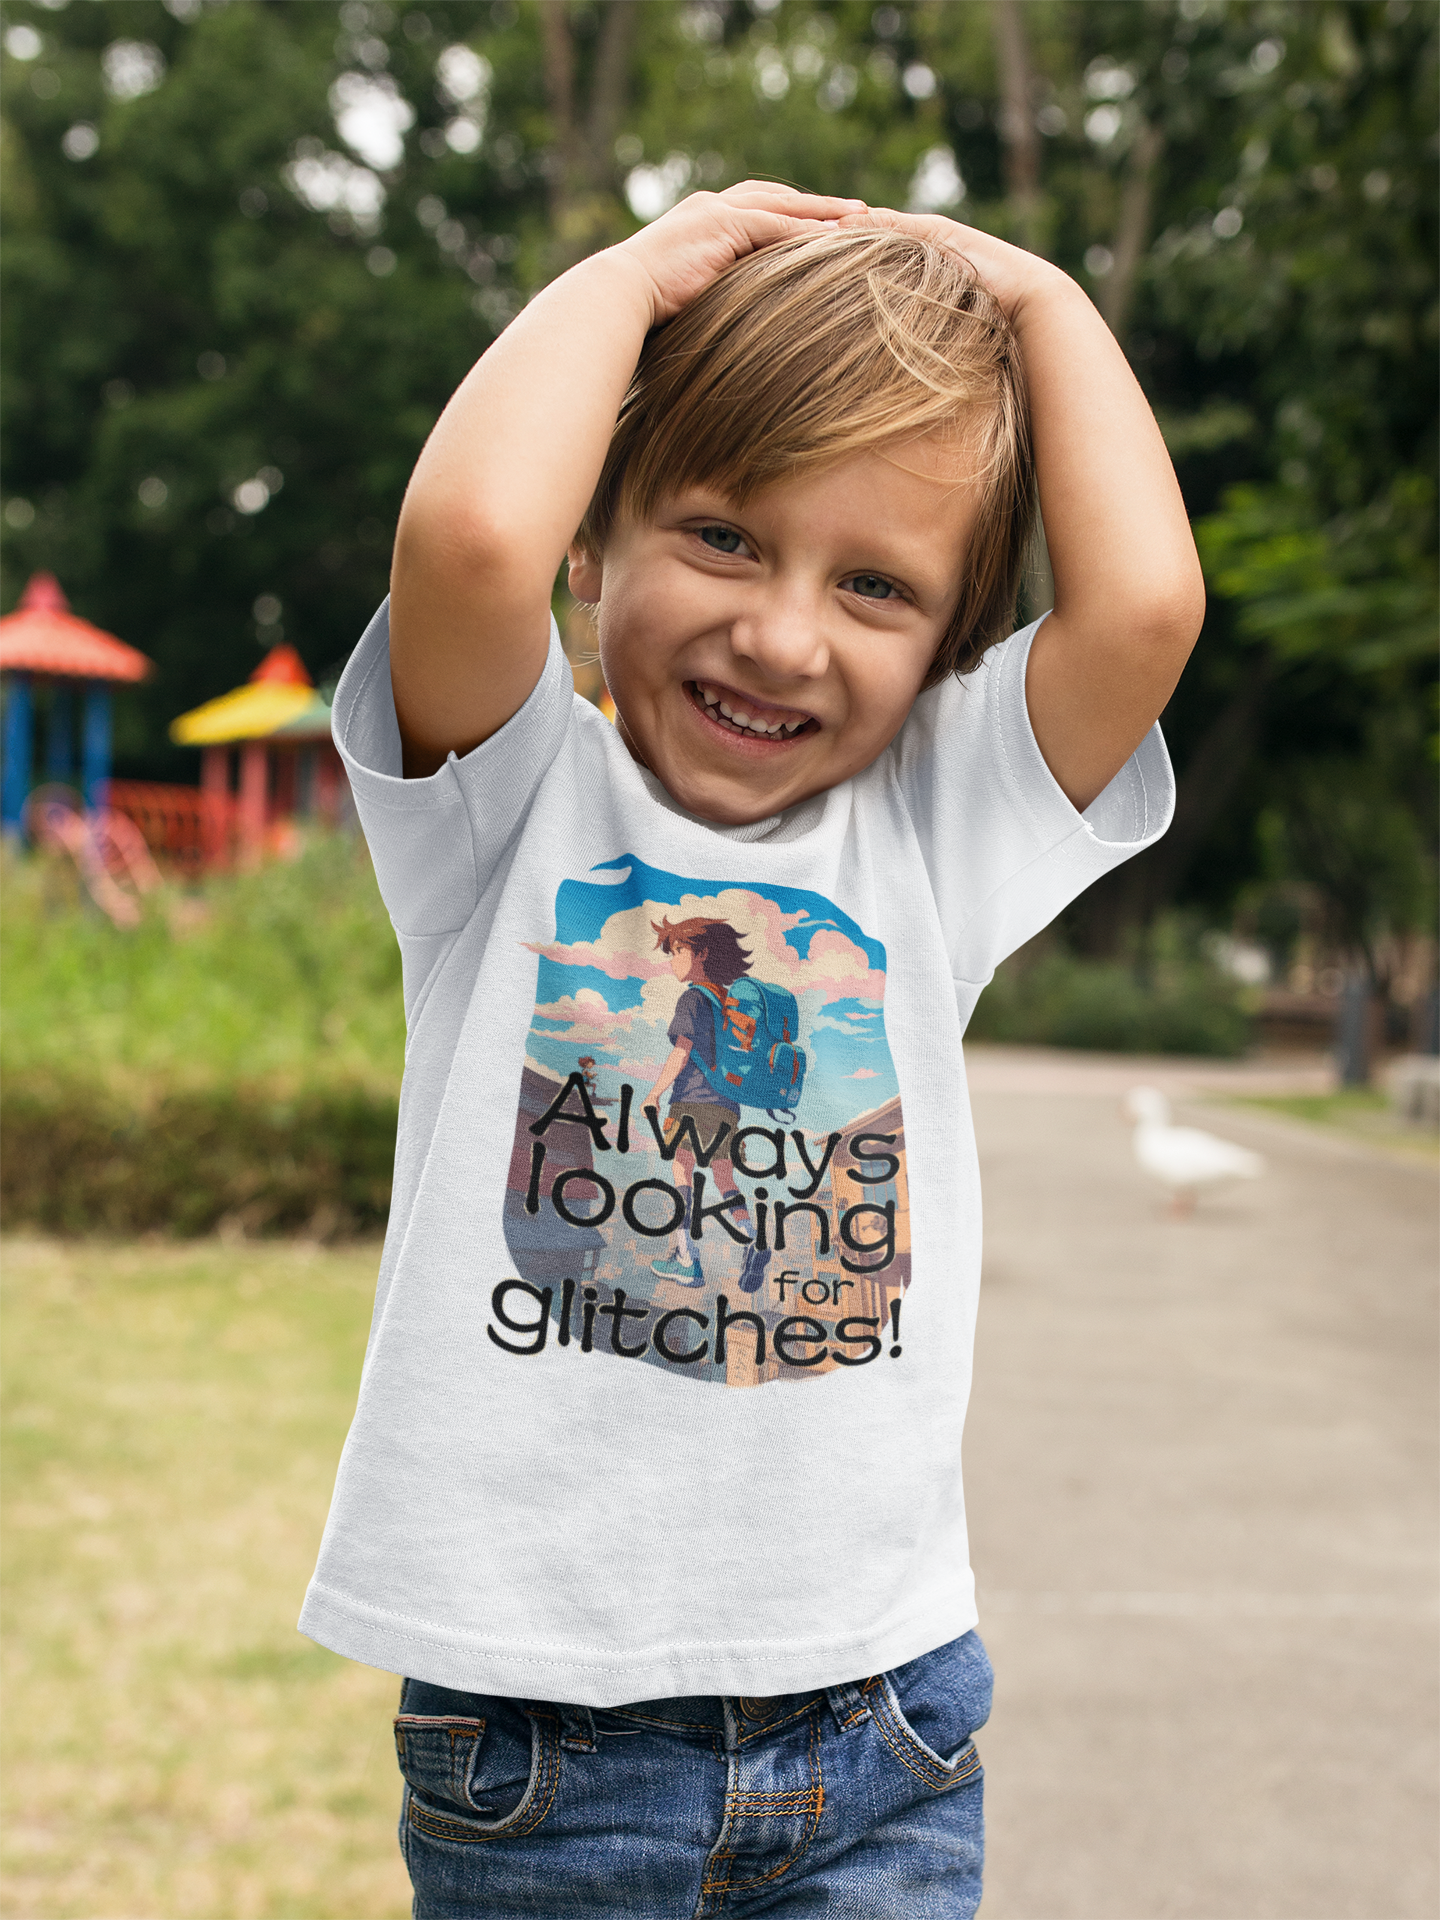 A little boy wearing the "Always looking for glitches" t-shirt.